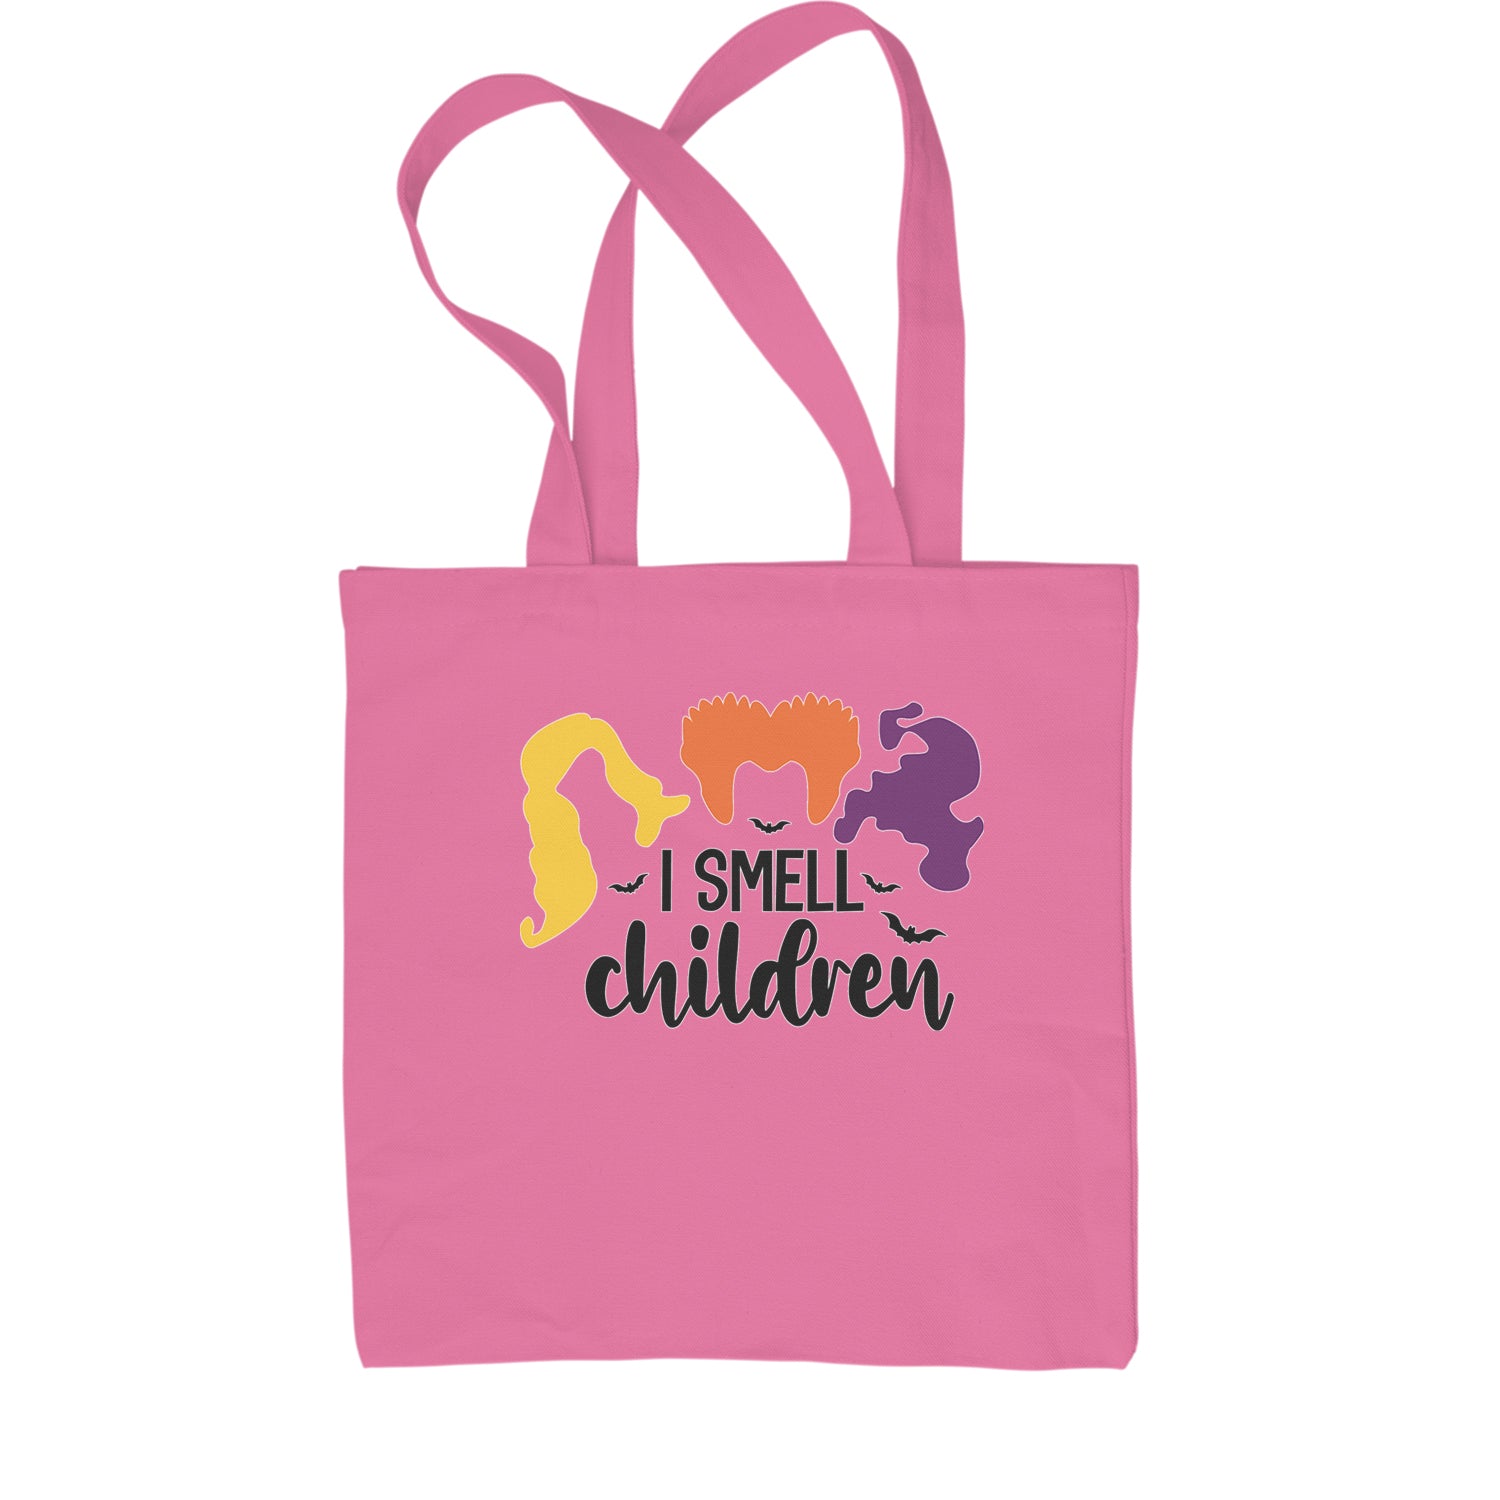 I Smell Children Hocus Pocus Shopping Tote Bag descendants, enchanted, eve, hallows, hocus, or, pocus, sanderson, sisters, treat, trick, witches by Expression Tees